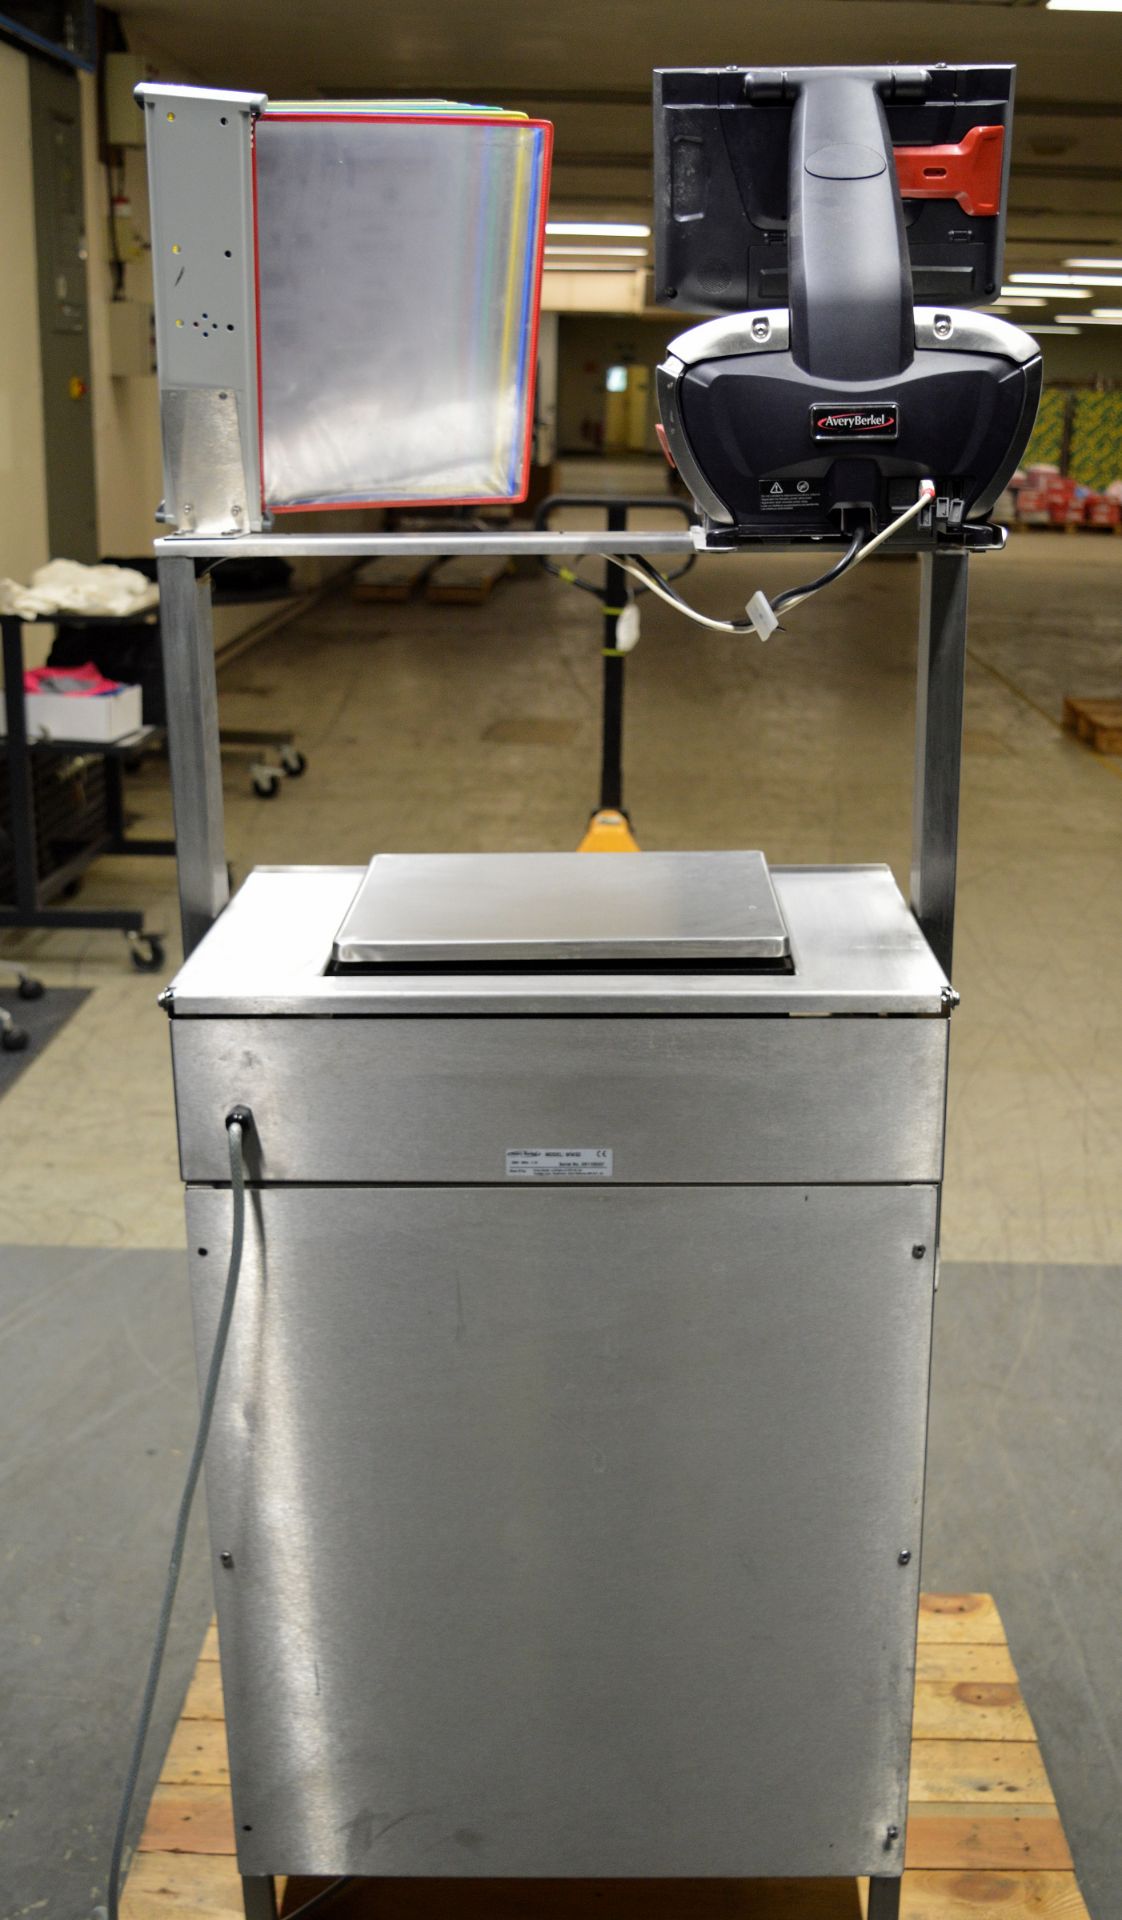 Avery Berkel WWS3 Label and Receipt Printing Scales with Shrink Wrapping Machine - Image 7 of 8